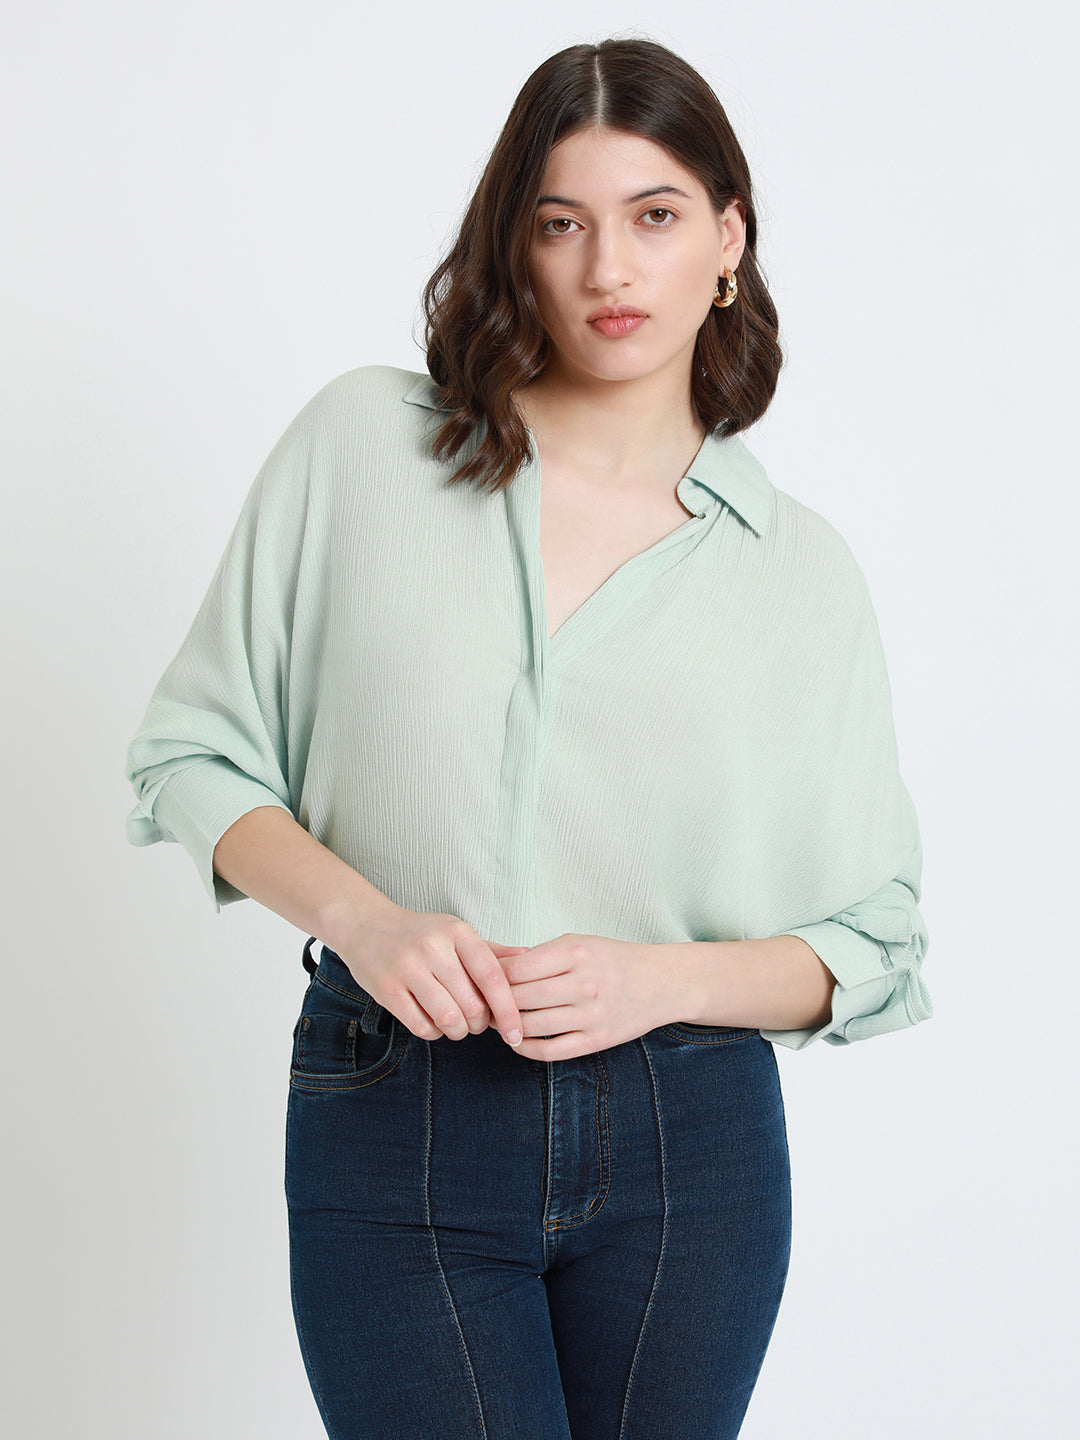 DL Woman Mint Oversized Spread Collar Cotton Casual Shirt